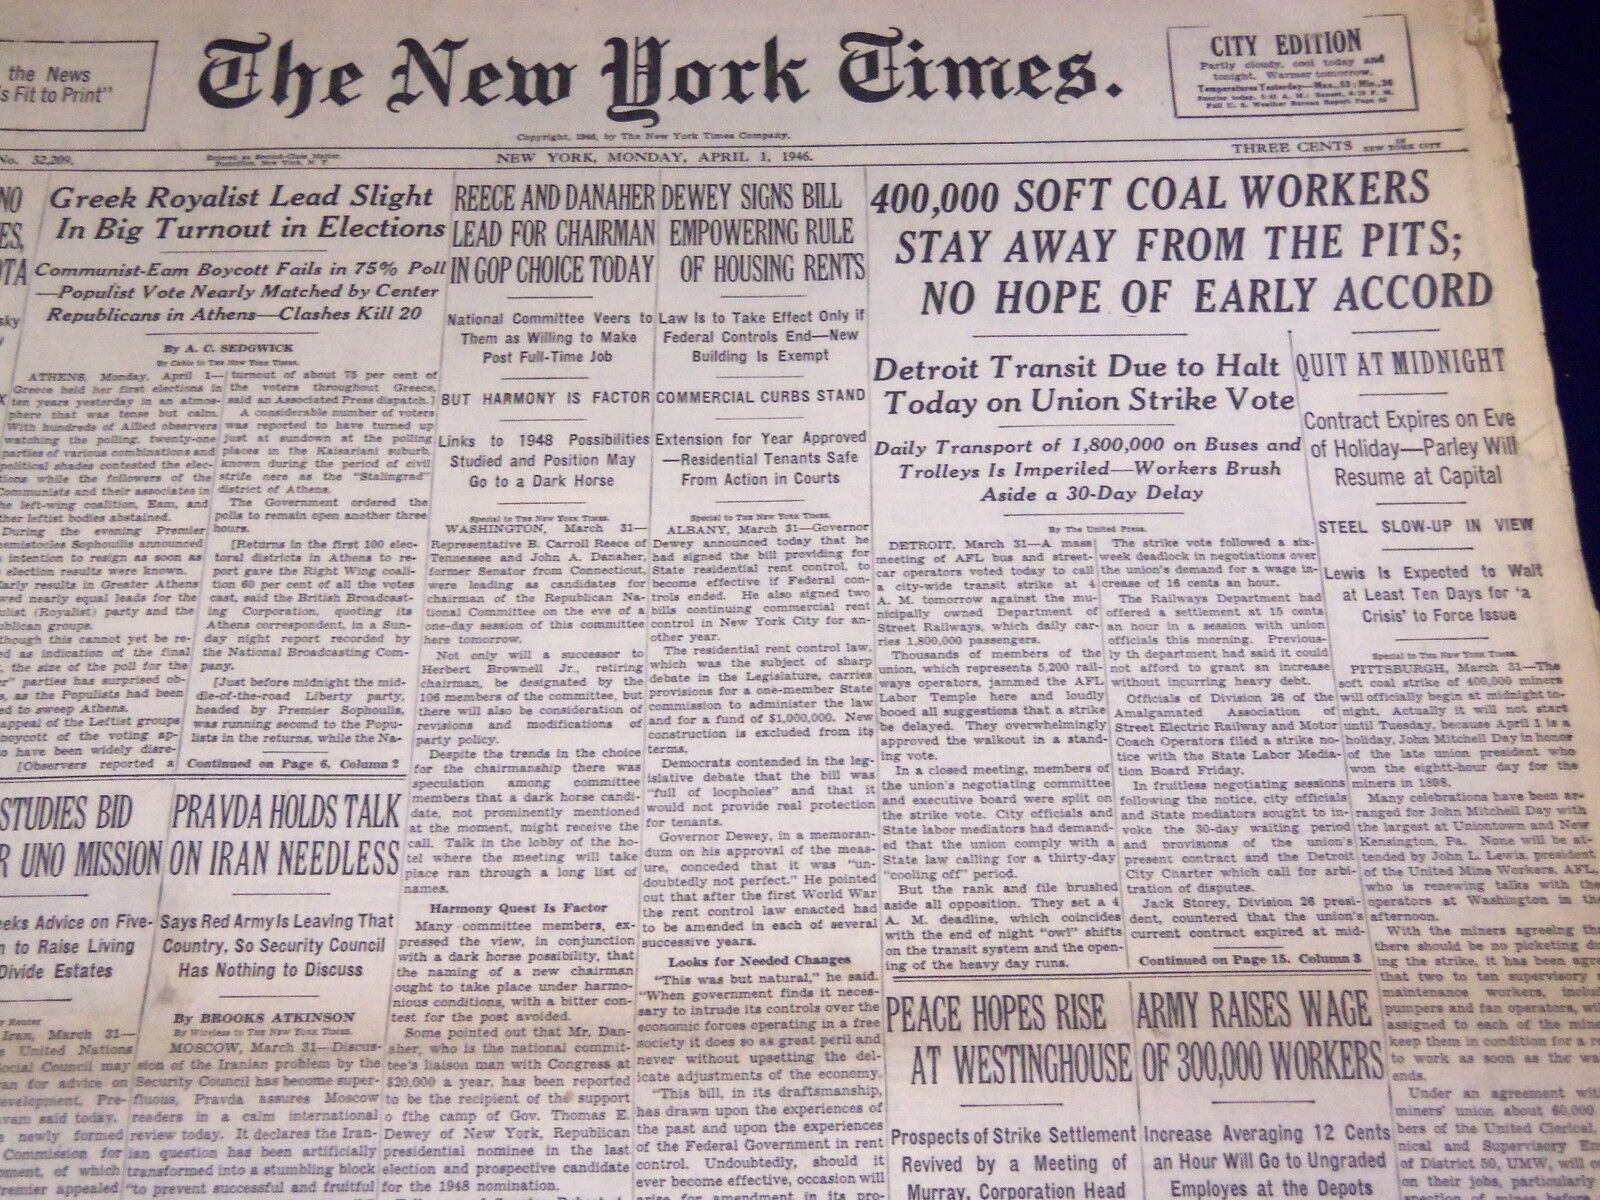 1946 APRIL 1 NEW YORK TIMES - COAL WORKERS STAY AWAY - NT 3128